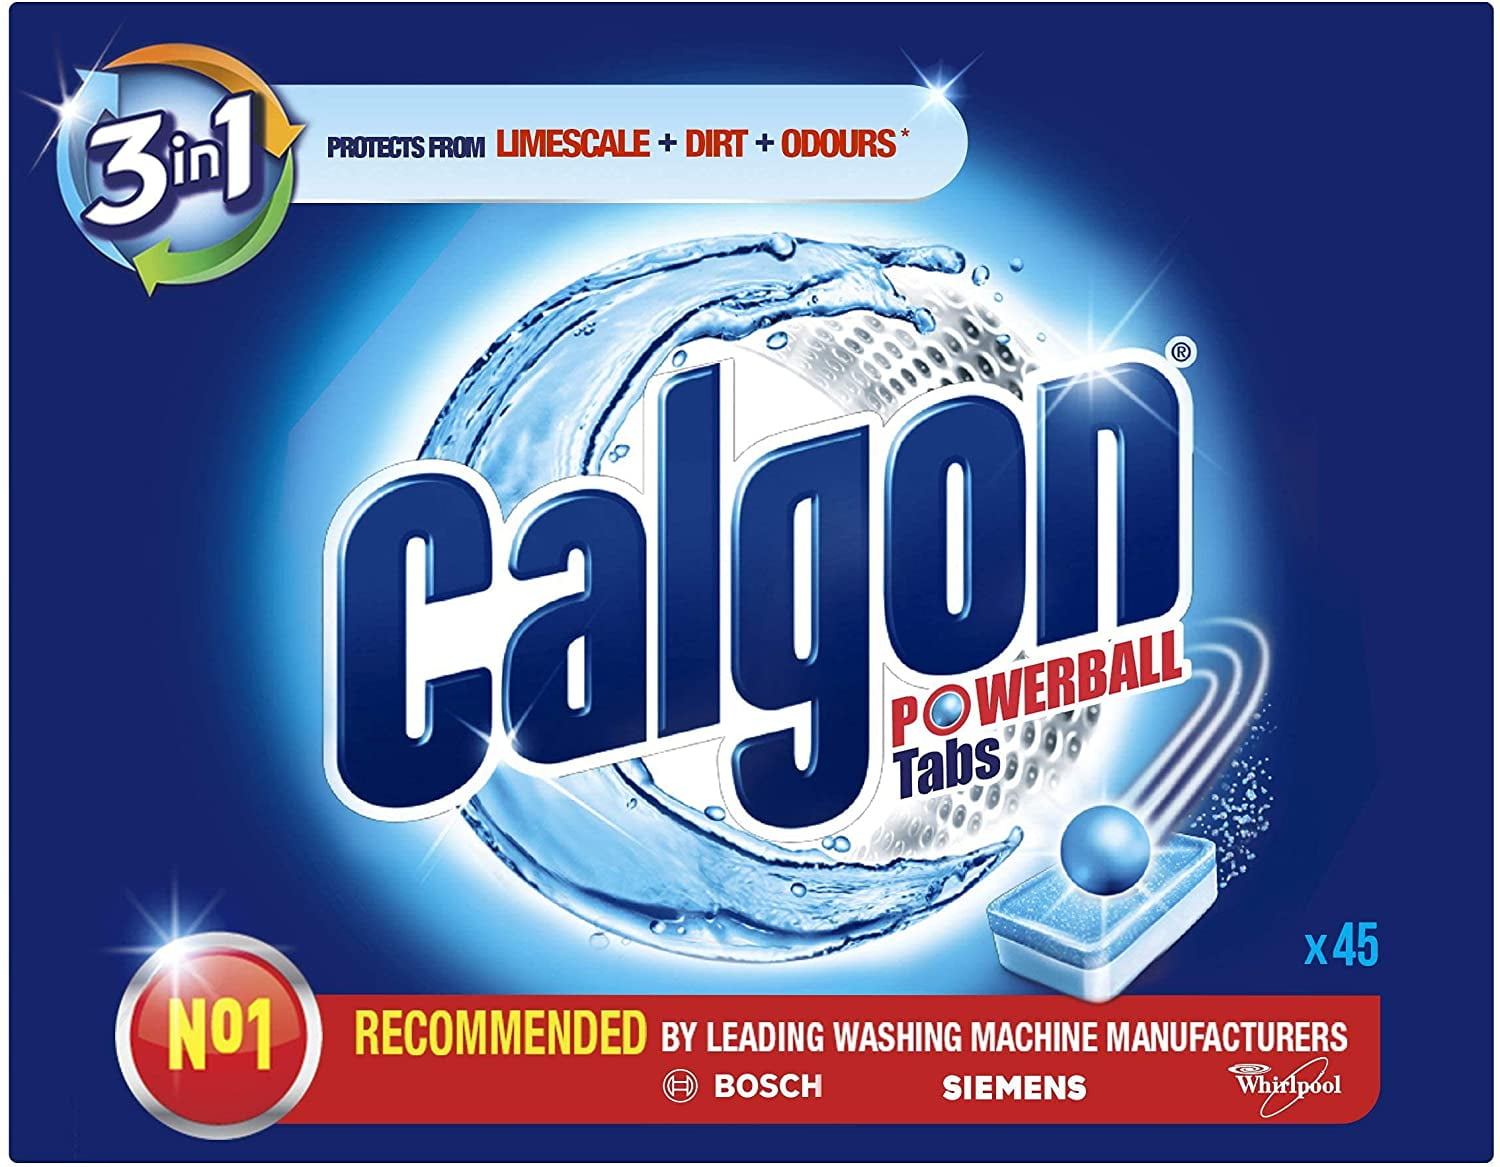 Calgon-3in1-Powerball-Tabs-Pack-of-45-Tablets_d39756d9-8b3f-4cad-b095-e65c555130c5.67ac6ae08845f01c53b9c59184f92fec.jpeg